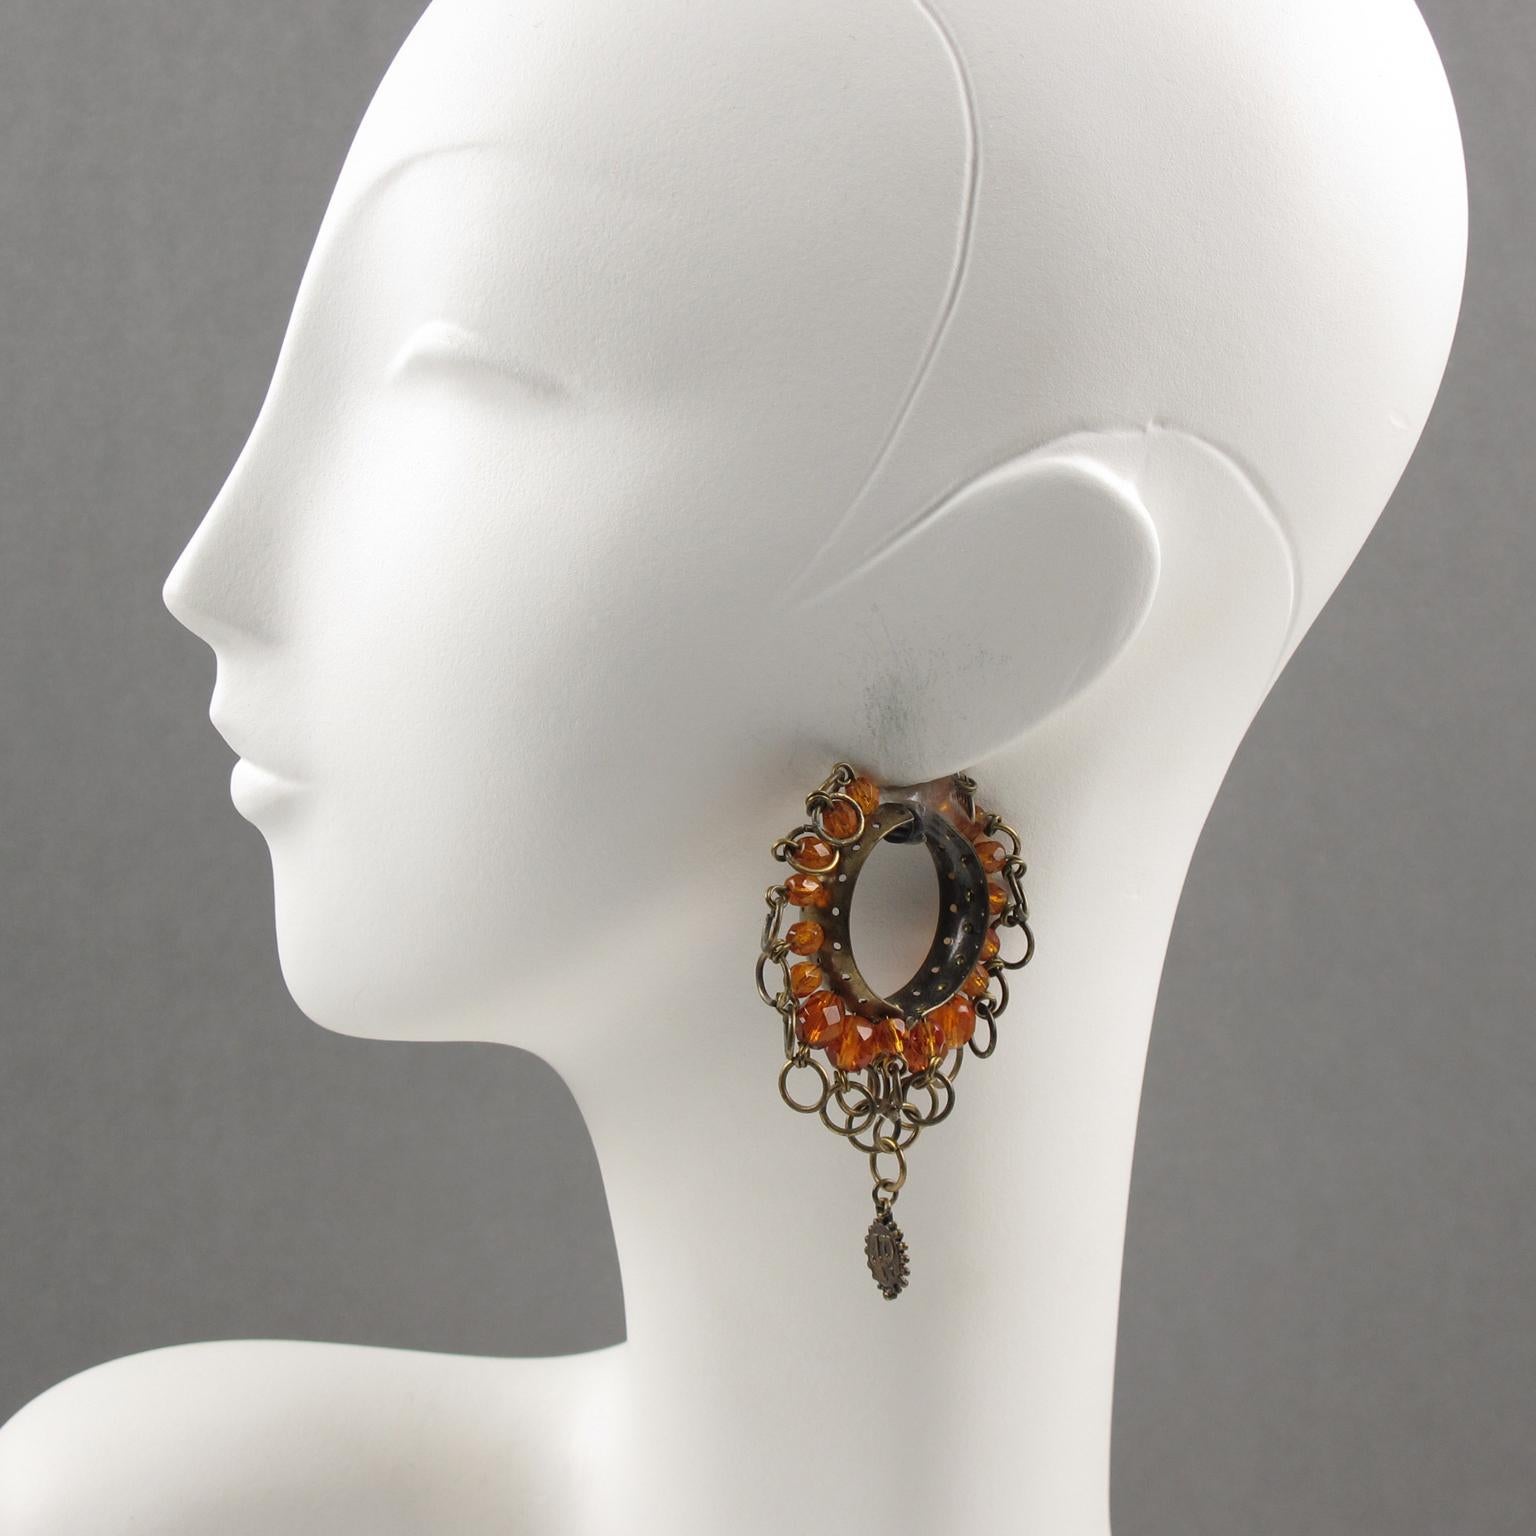 Lovely Jean Paul Gaultier Paris gothic inspiration signed clip-on earrings. Large hoop shape in gilt metal with aged patina ornate with metal rings and orange glass faceted beads. Dangling 